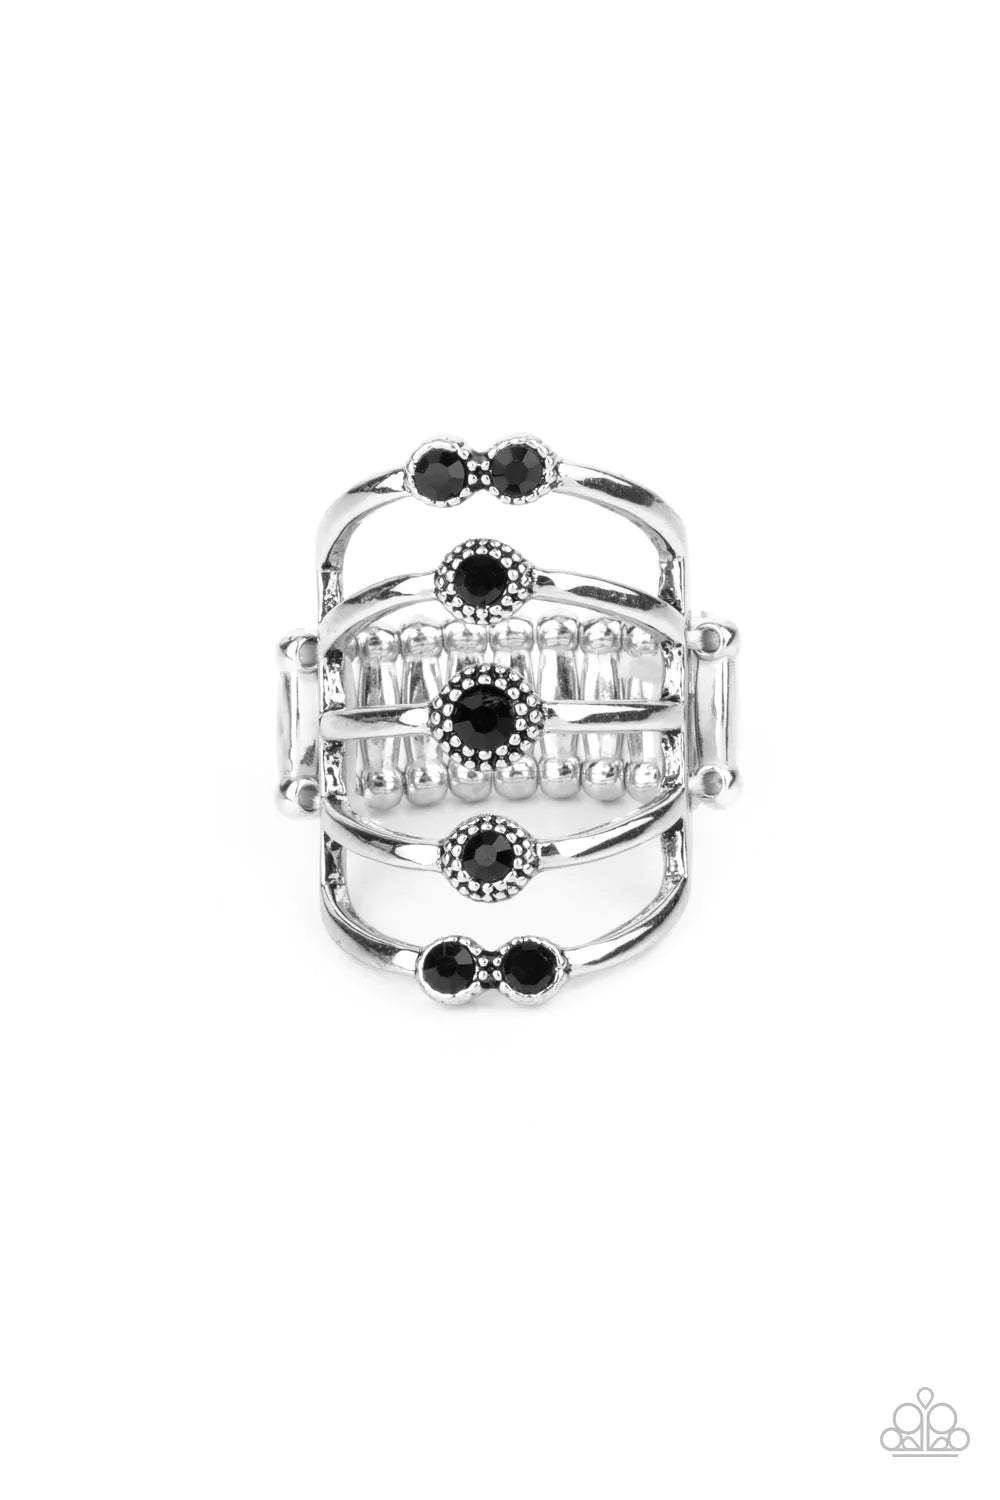 Layer On The Luster - Black and Silver Ring - Paparazzi Accessories - Layers of silver bands, featuring jet black crystals set in round silver-studded frames, stack up the finger creating a cascade of sophisticated luster. Features a stretchy band for a flexible fit. Sold as one individual ring.